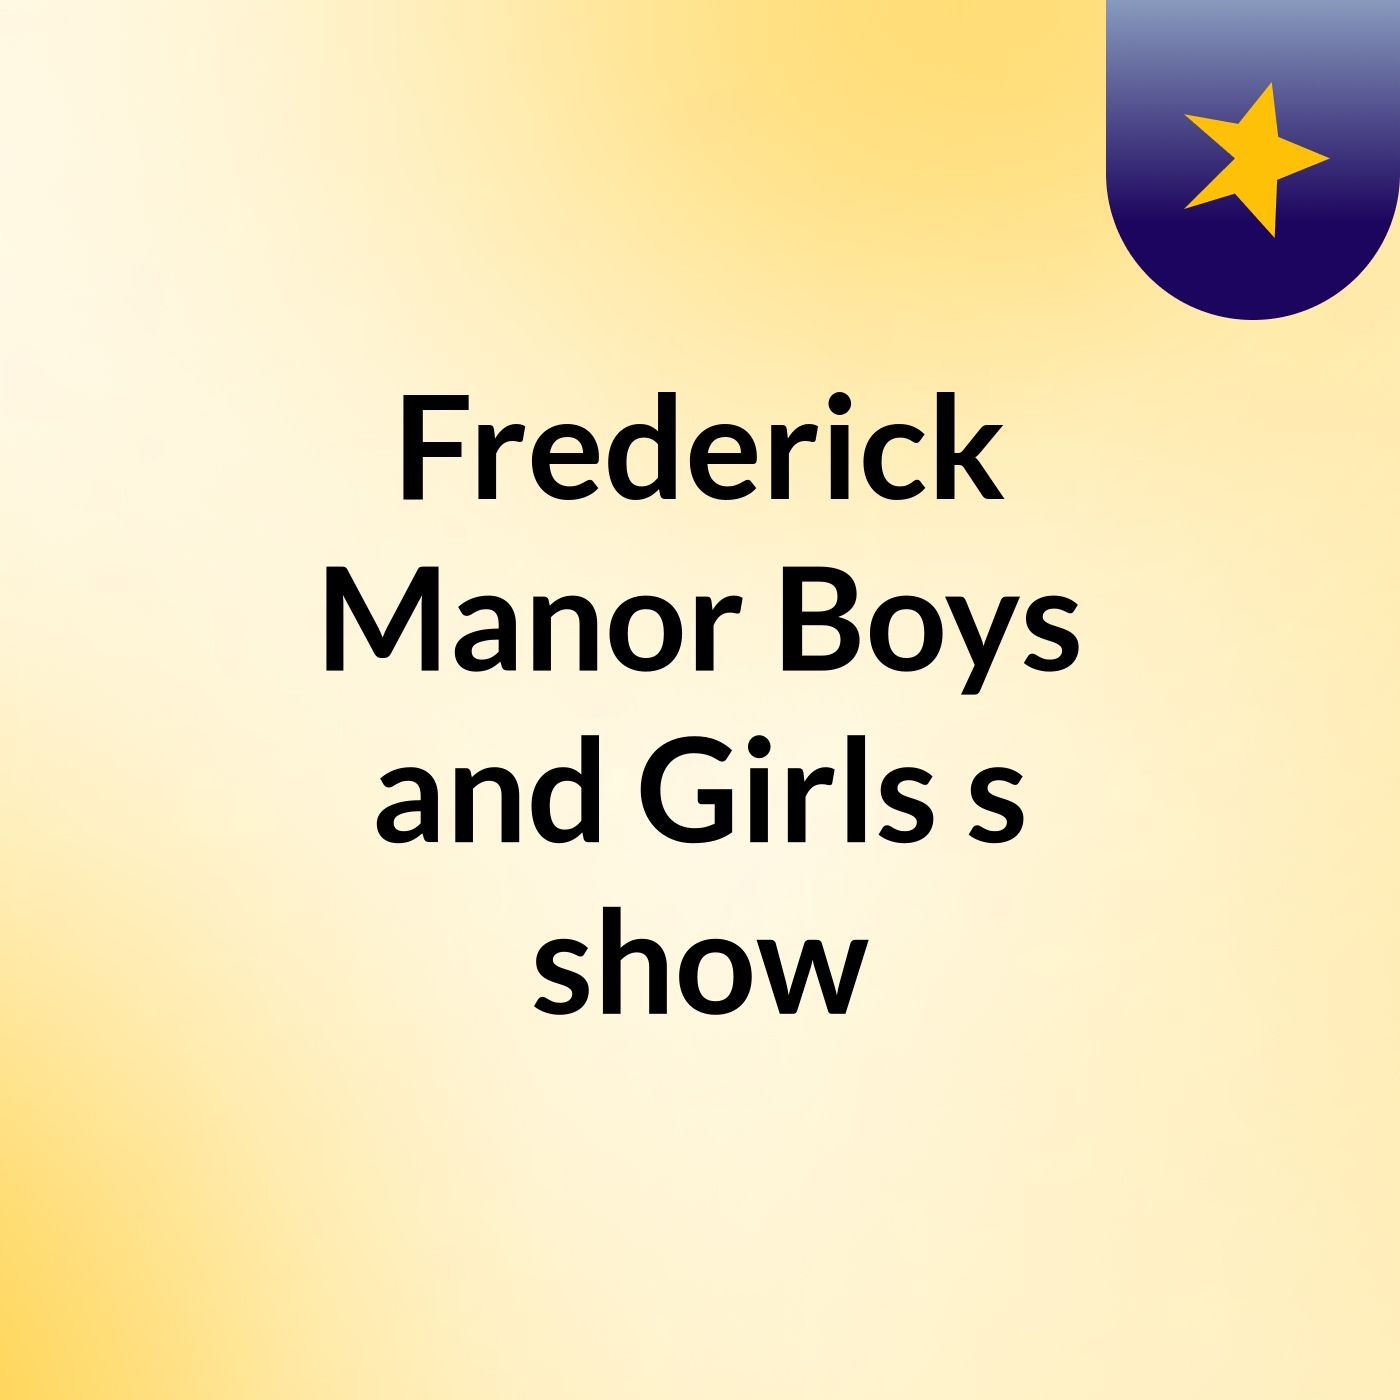 Frederick Manor Boys and Girls's show